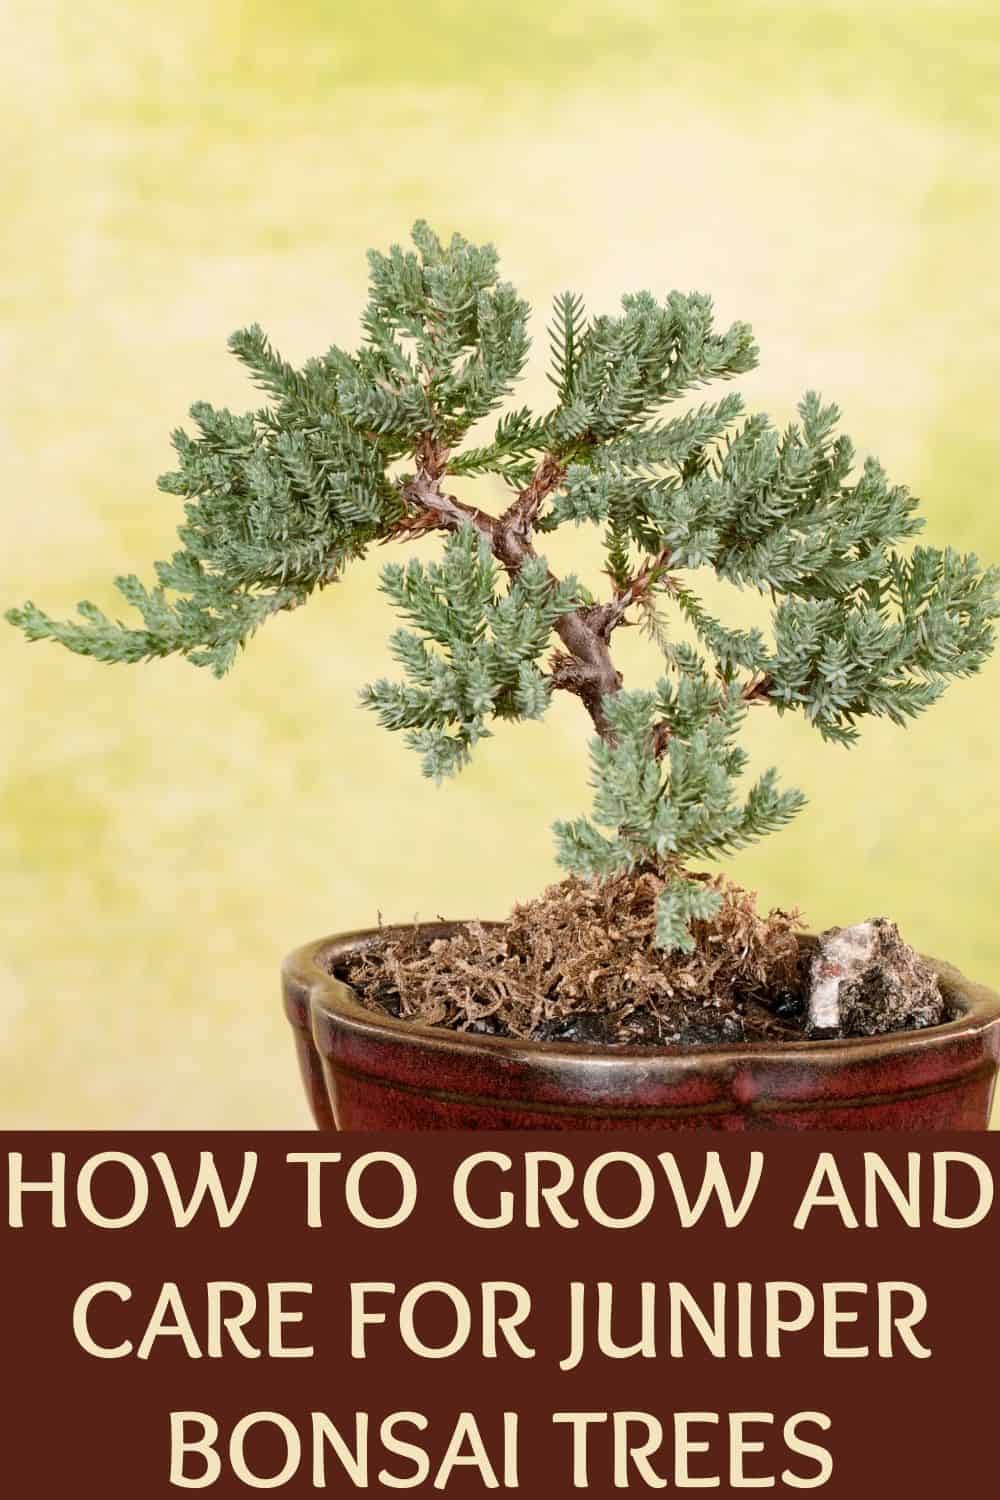 How to grow and care for juniper bonsai trees